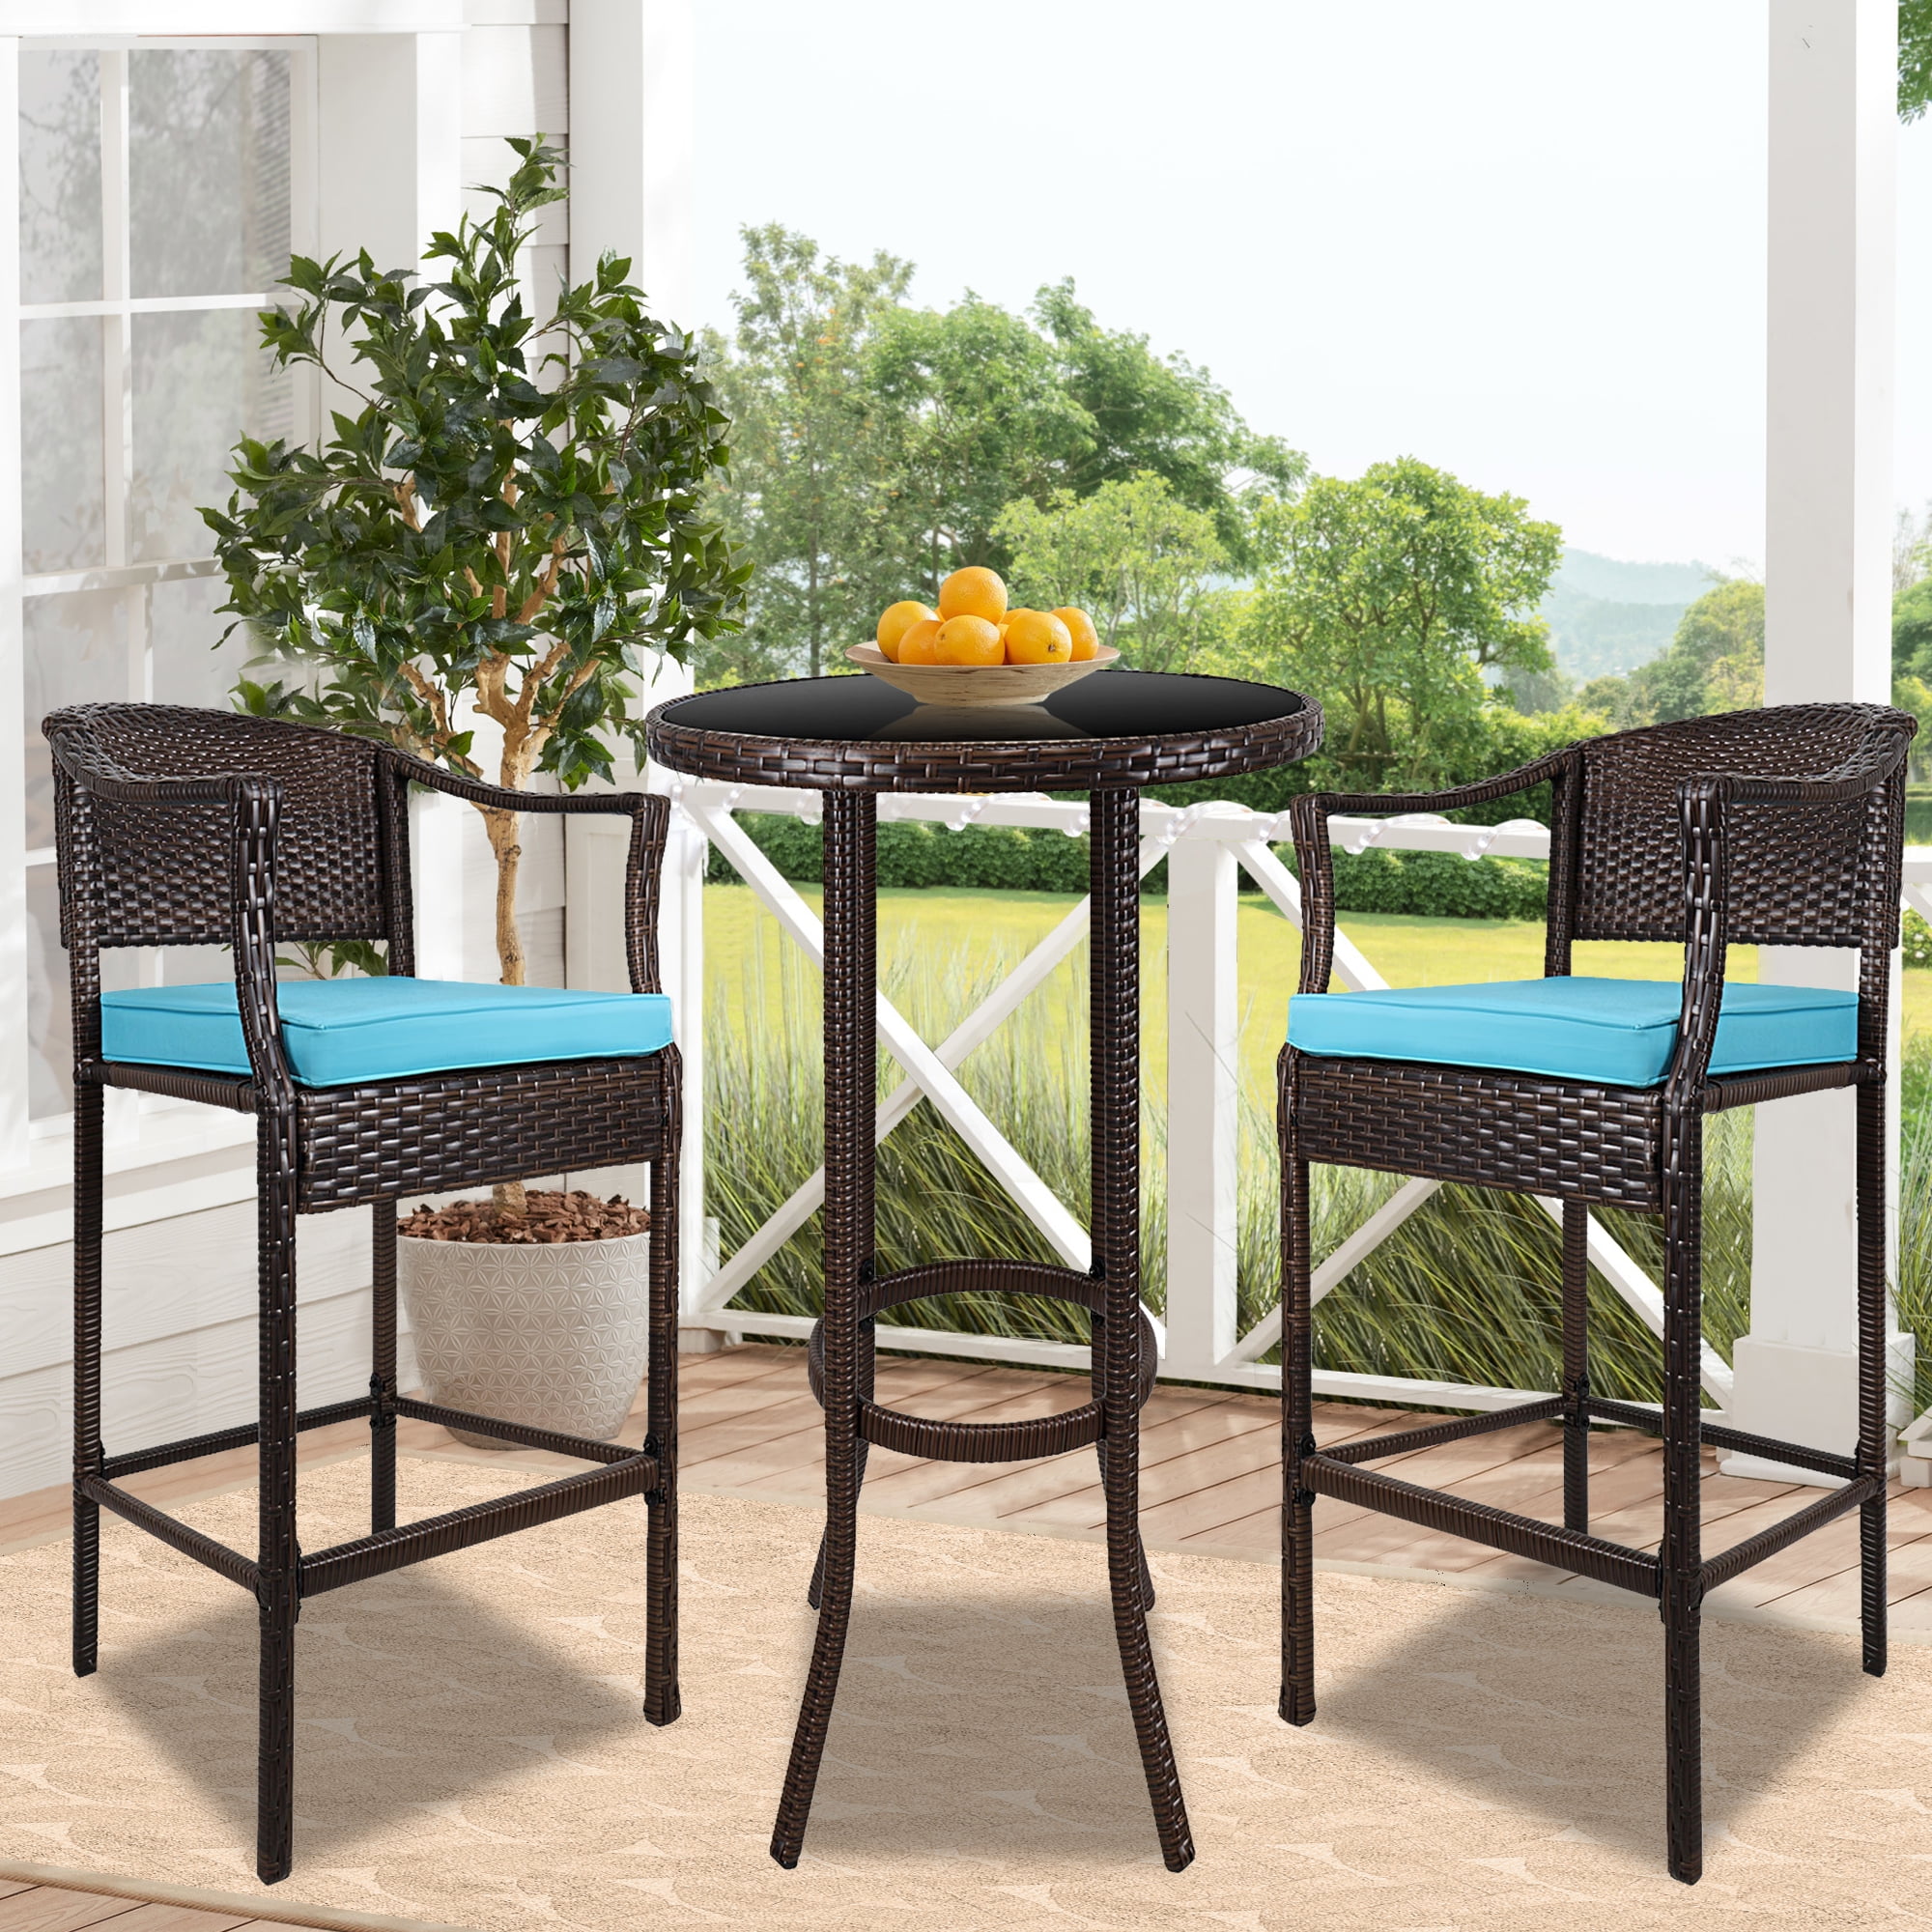 Bistro Table And Chairs 3 Piece Bar, Outdoor Furniture Bar Stools And Table